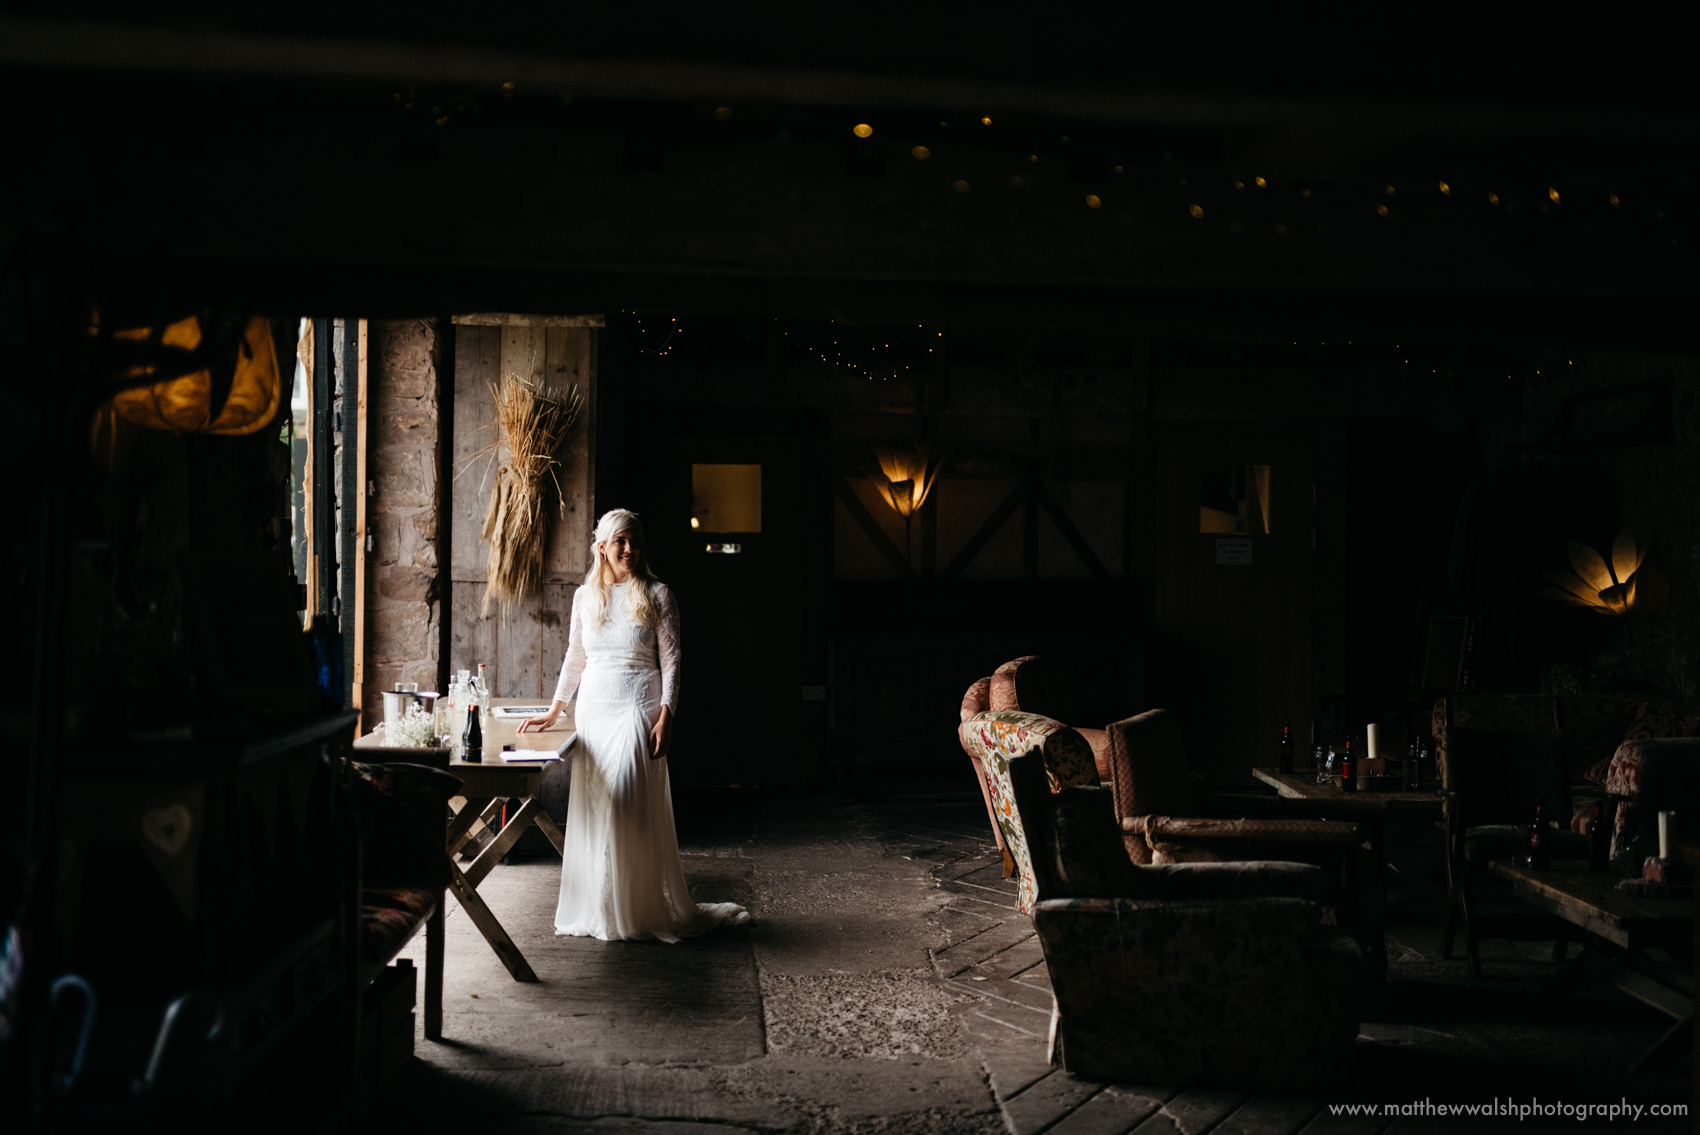 An observed moment of the bride standing by the barn entrance soaked in natural light in a perfectly exposed photograph